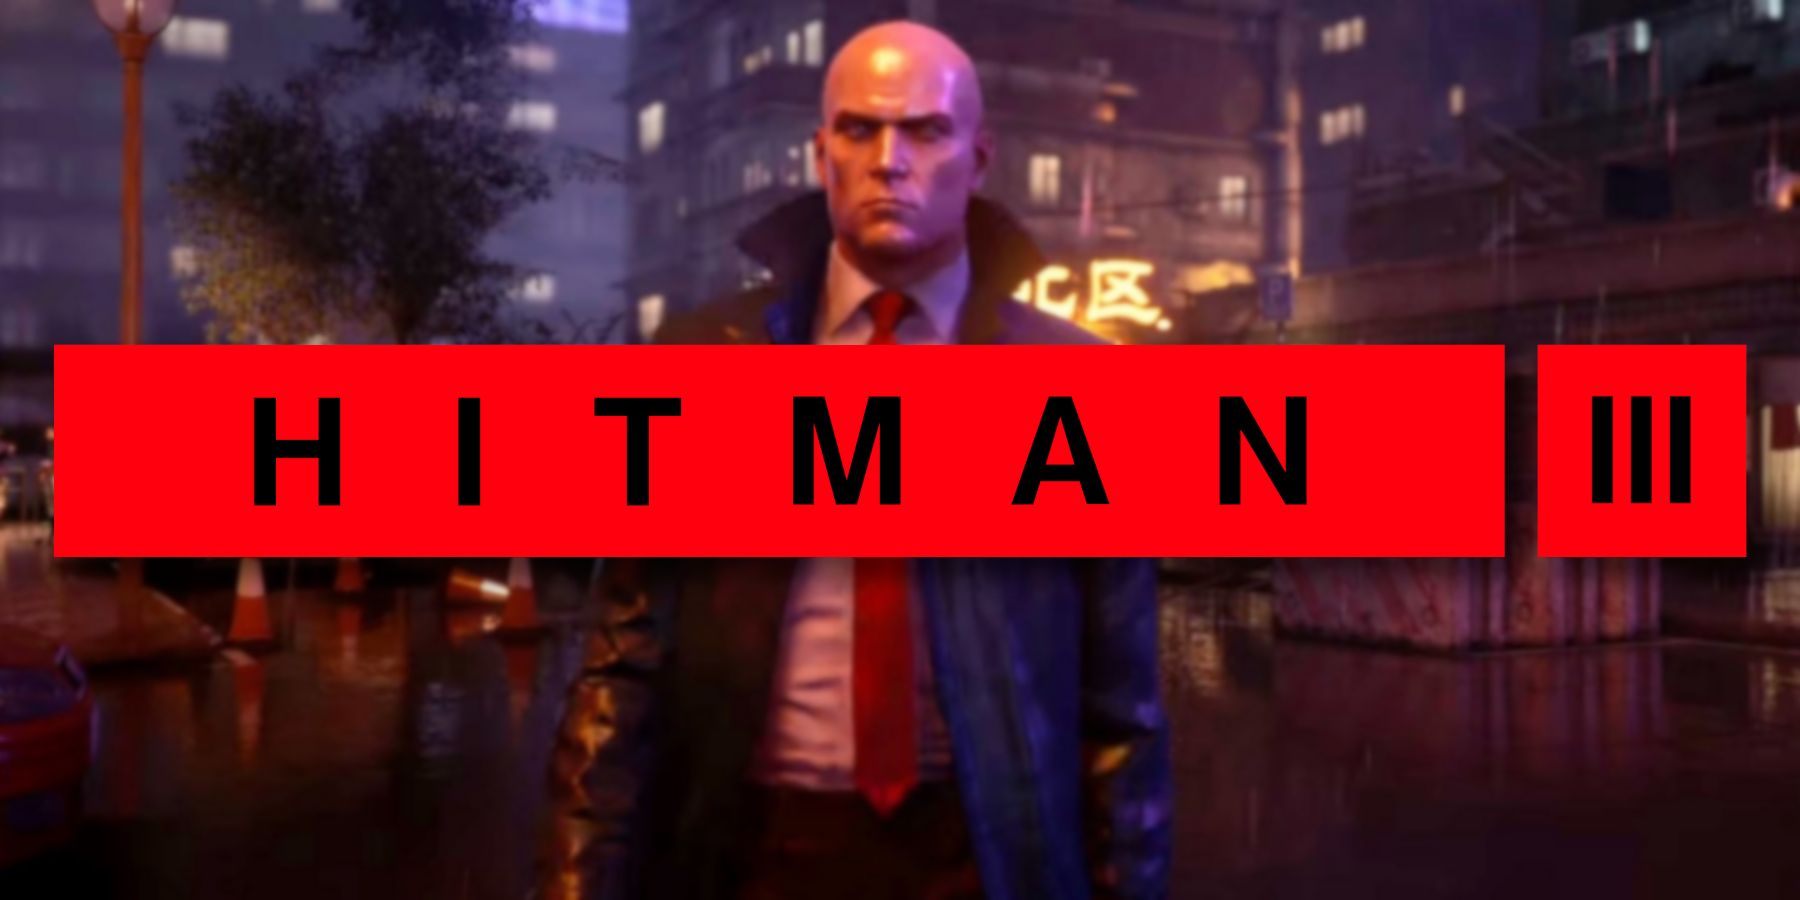 The Hitman 3 logo in bright red with Agent 47 in the background, waling in the rain.